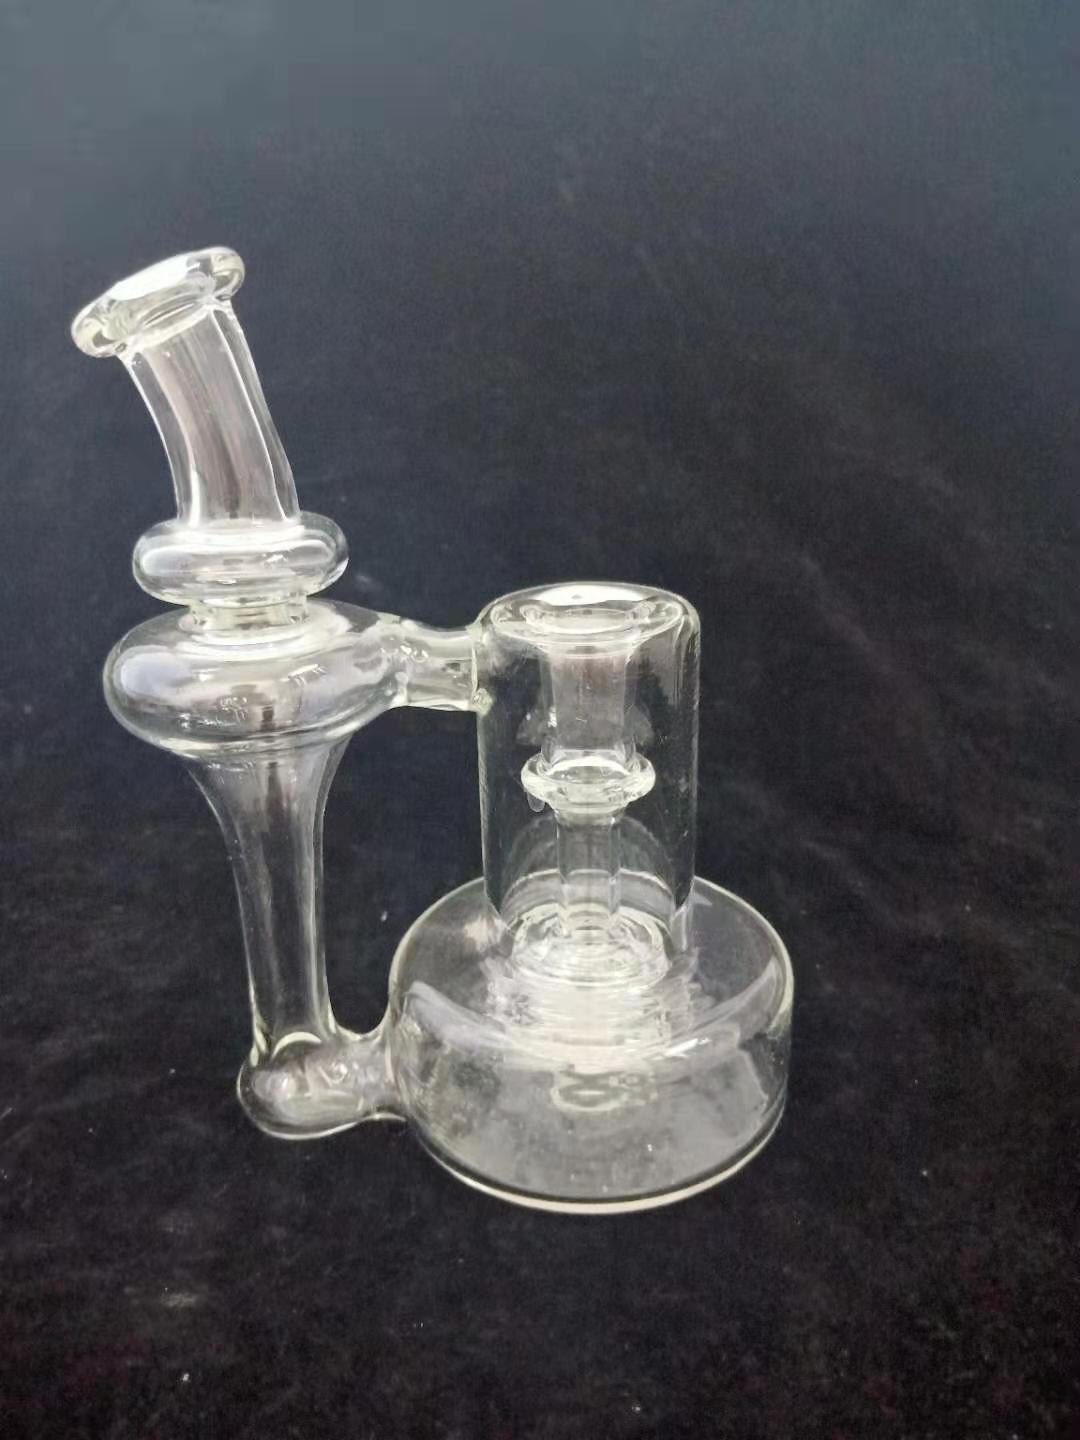 

smoking accessories High artistic and collection value Glass Recycler Bong 14mm rig Independent design factory supplies wholesale retail